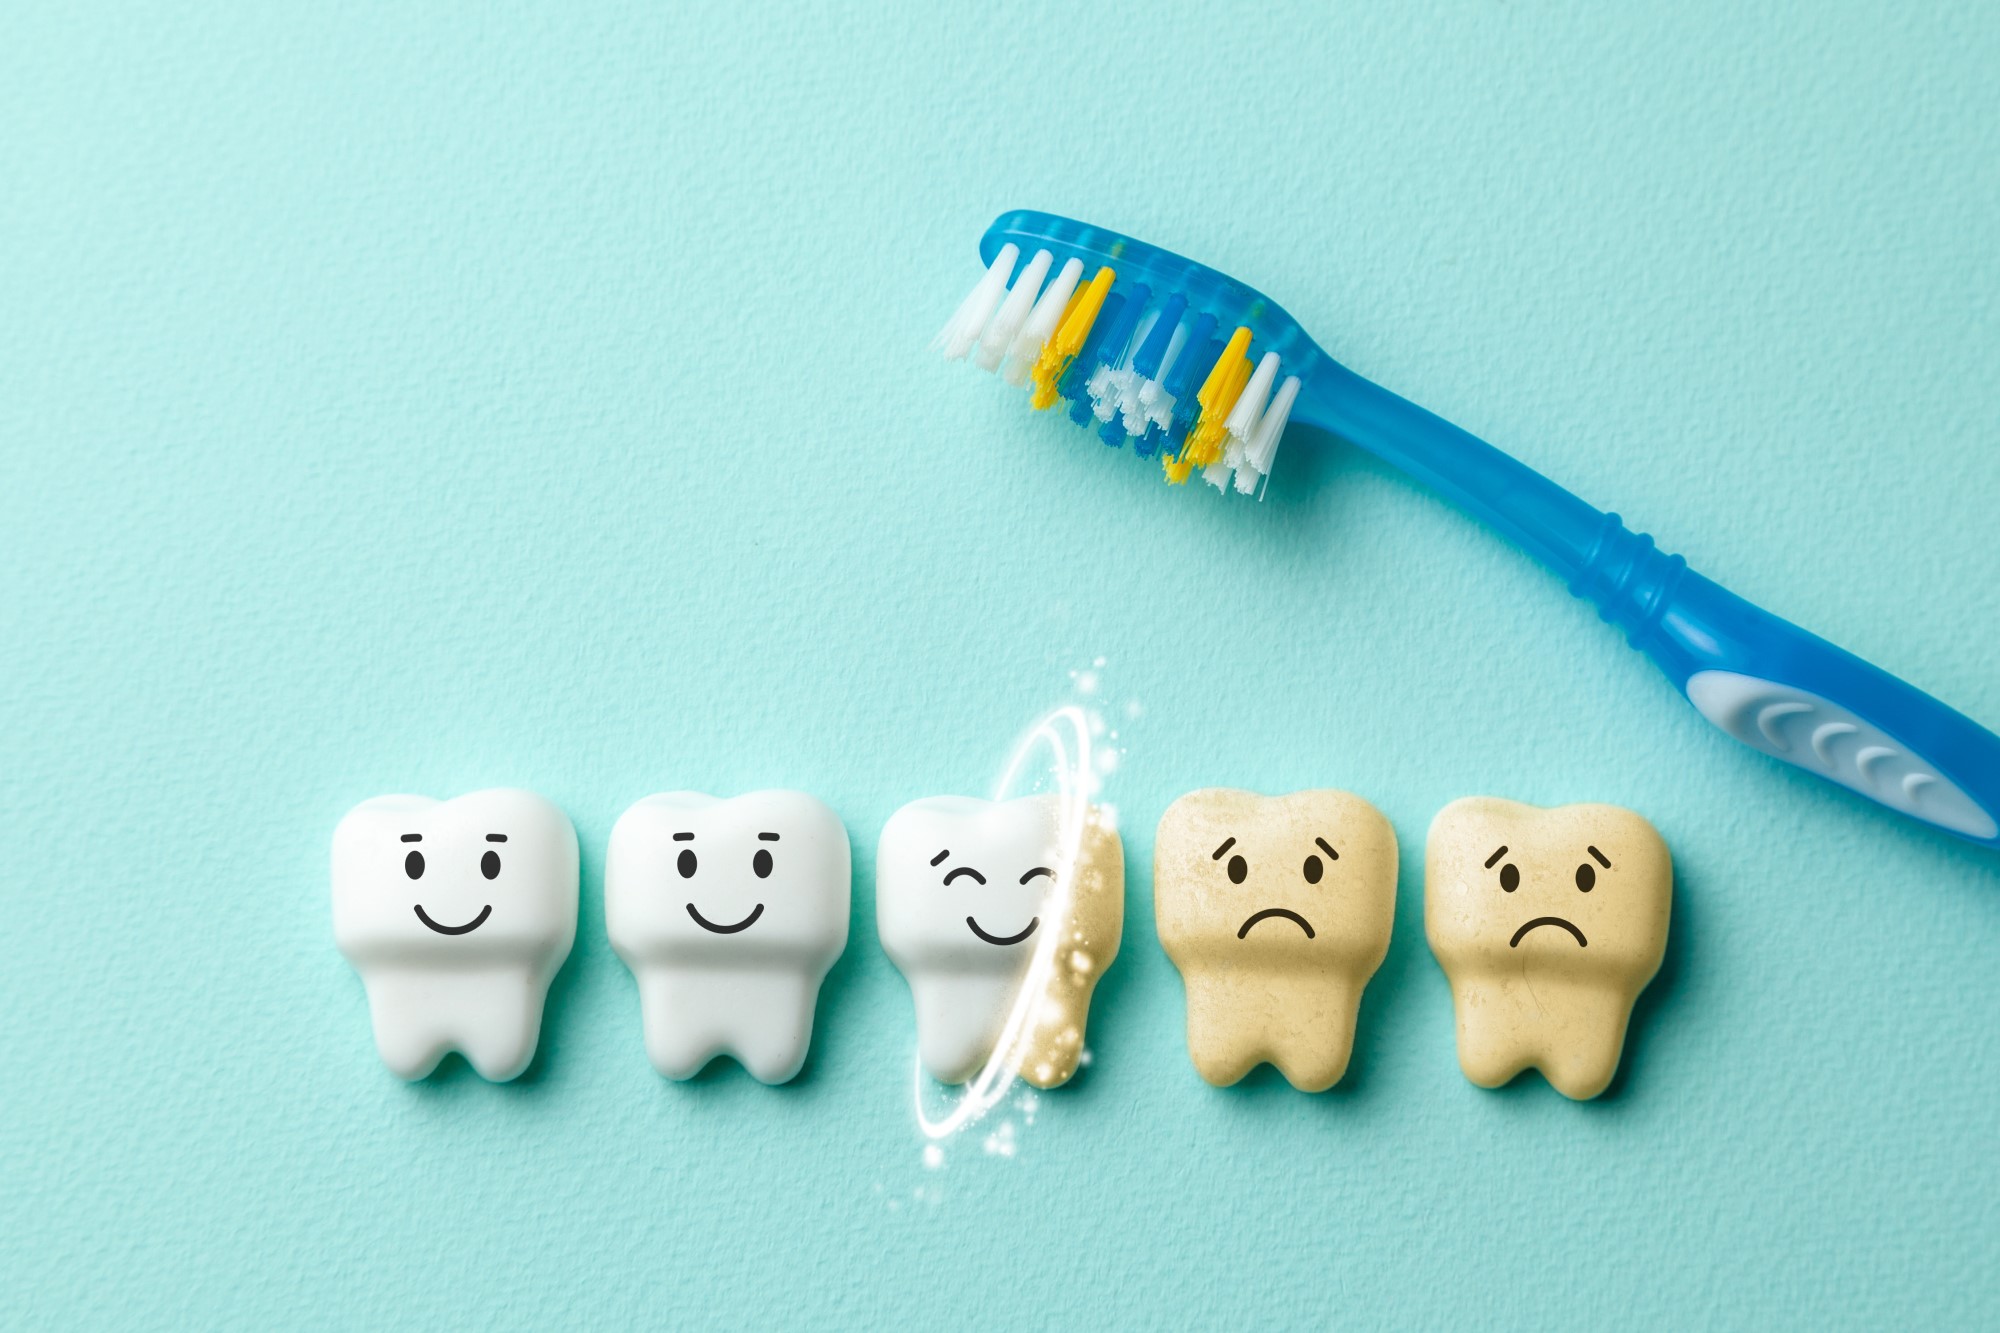 Toothbrush making teeth whiter and scrubbing off coffee stains